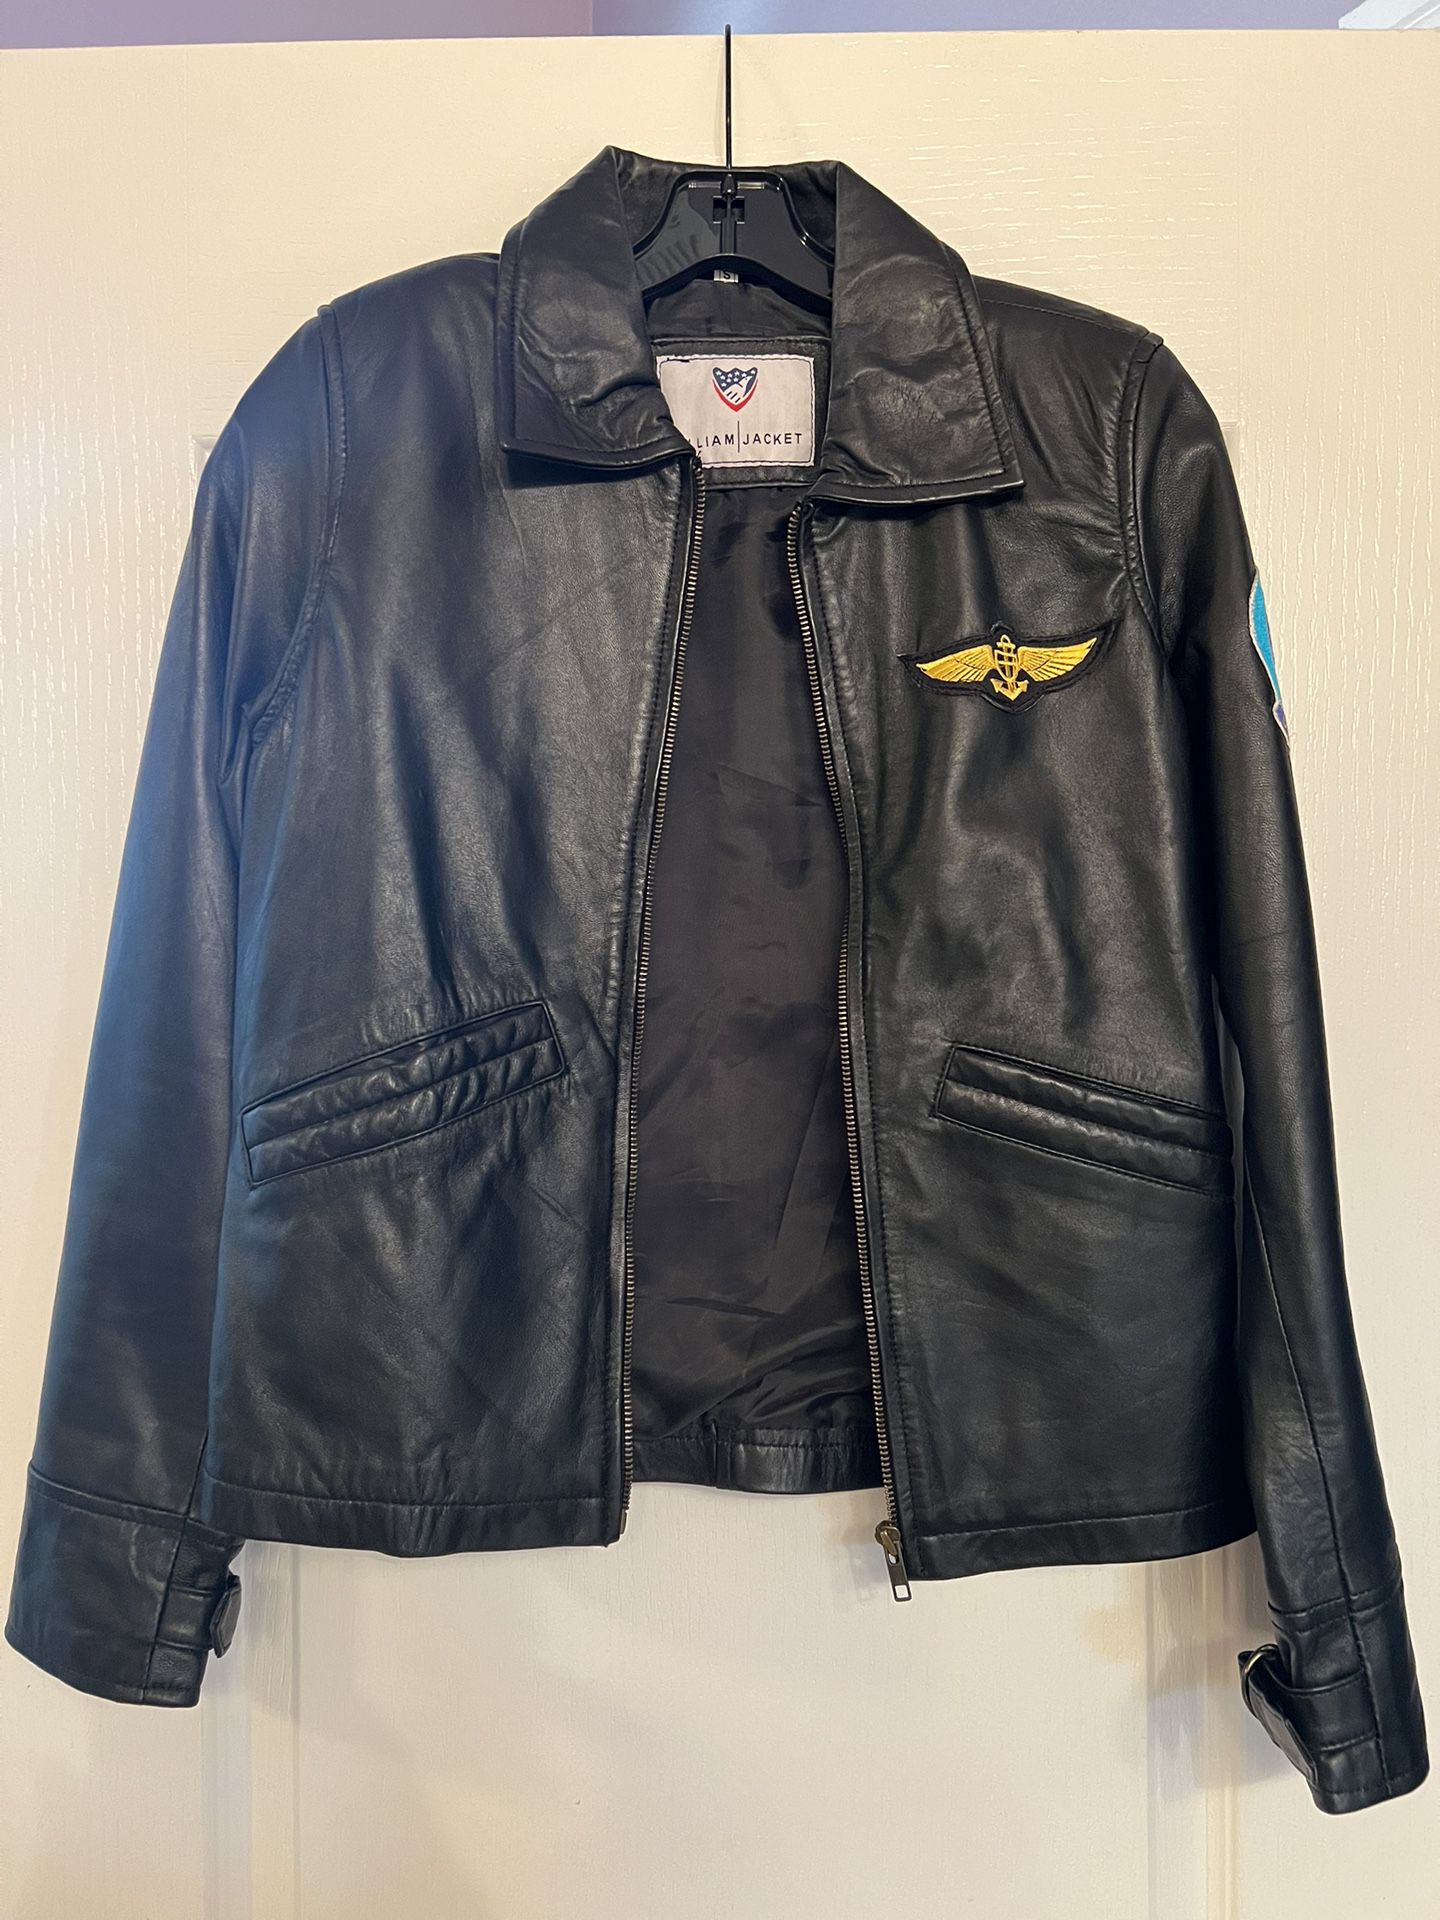 Authentic Leather Top Gun Jacket for Sale in Las Vegas, NV - OfferUp